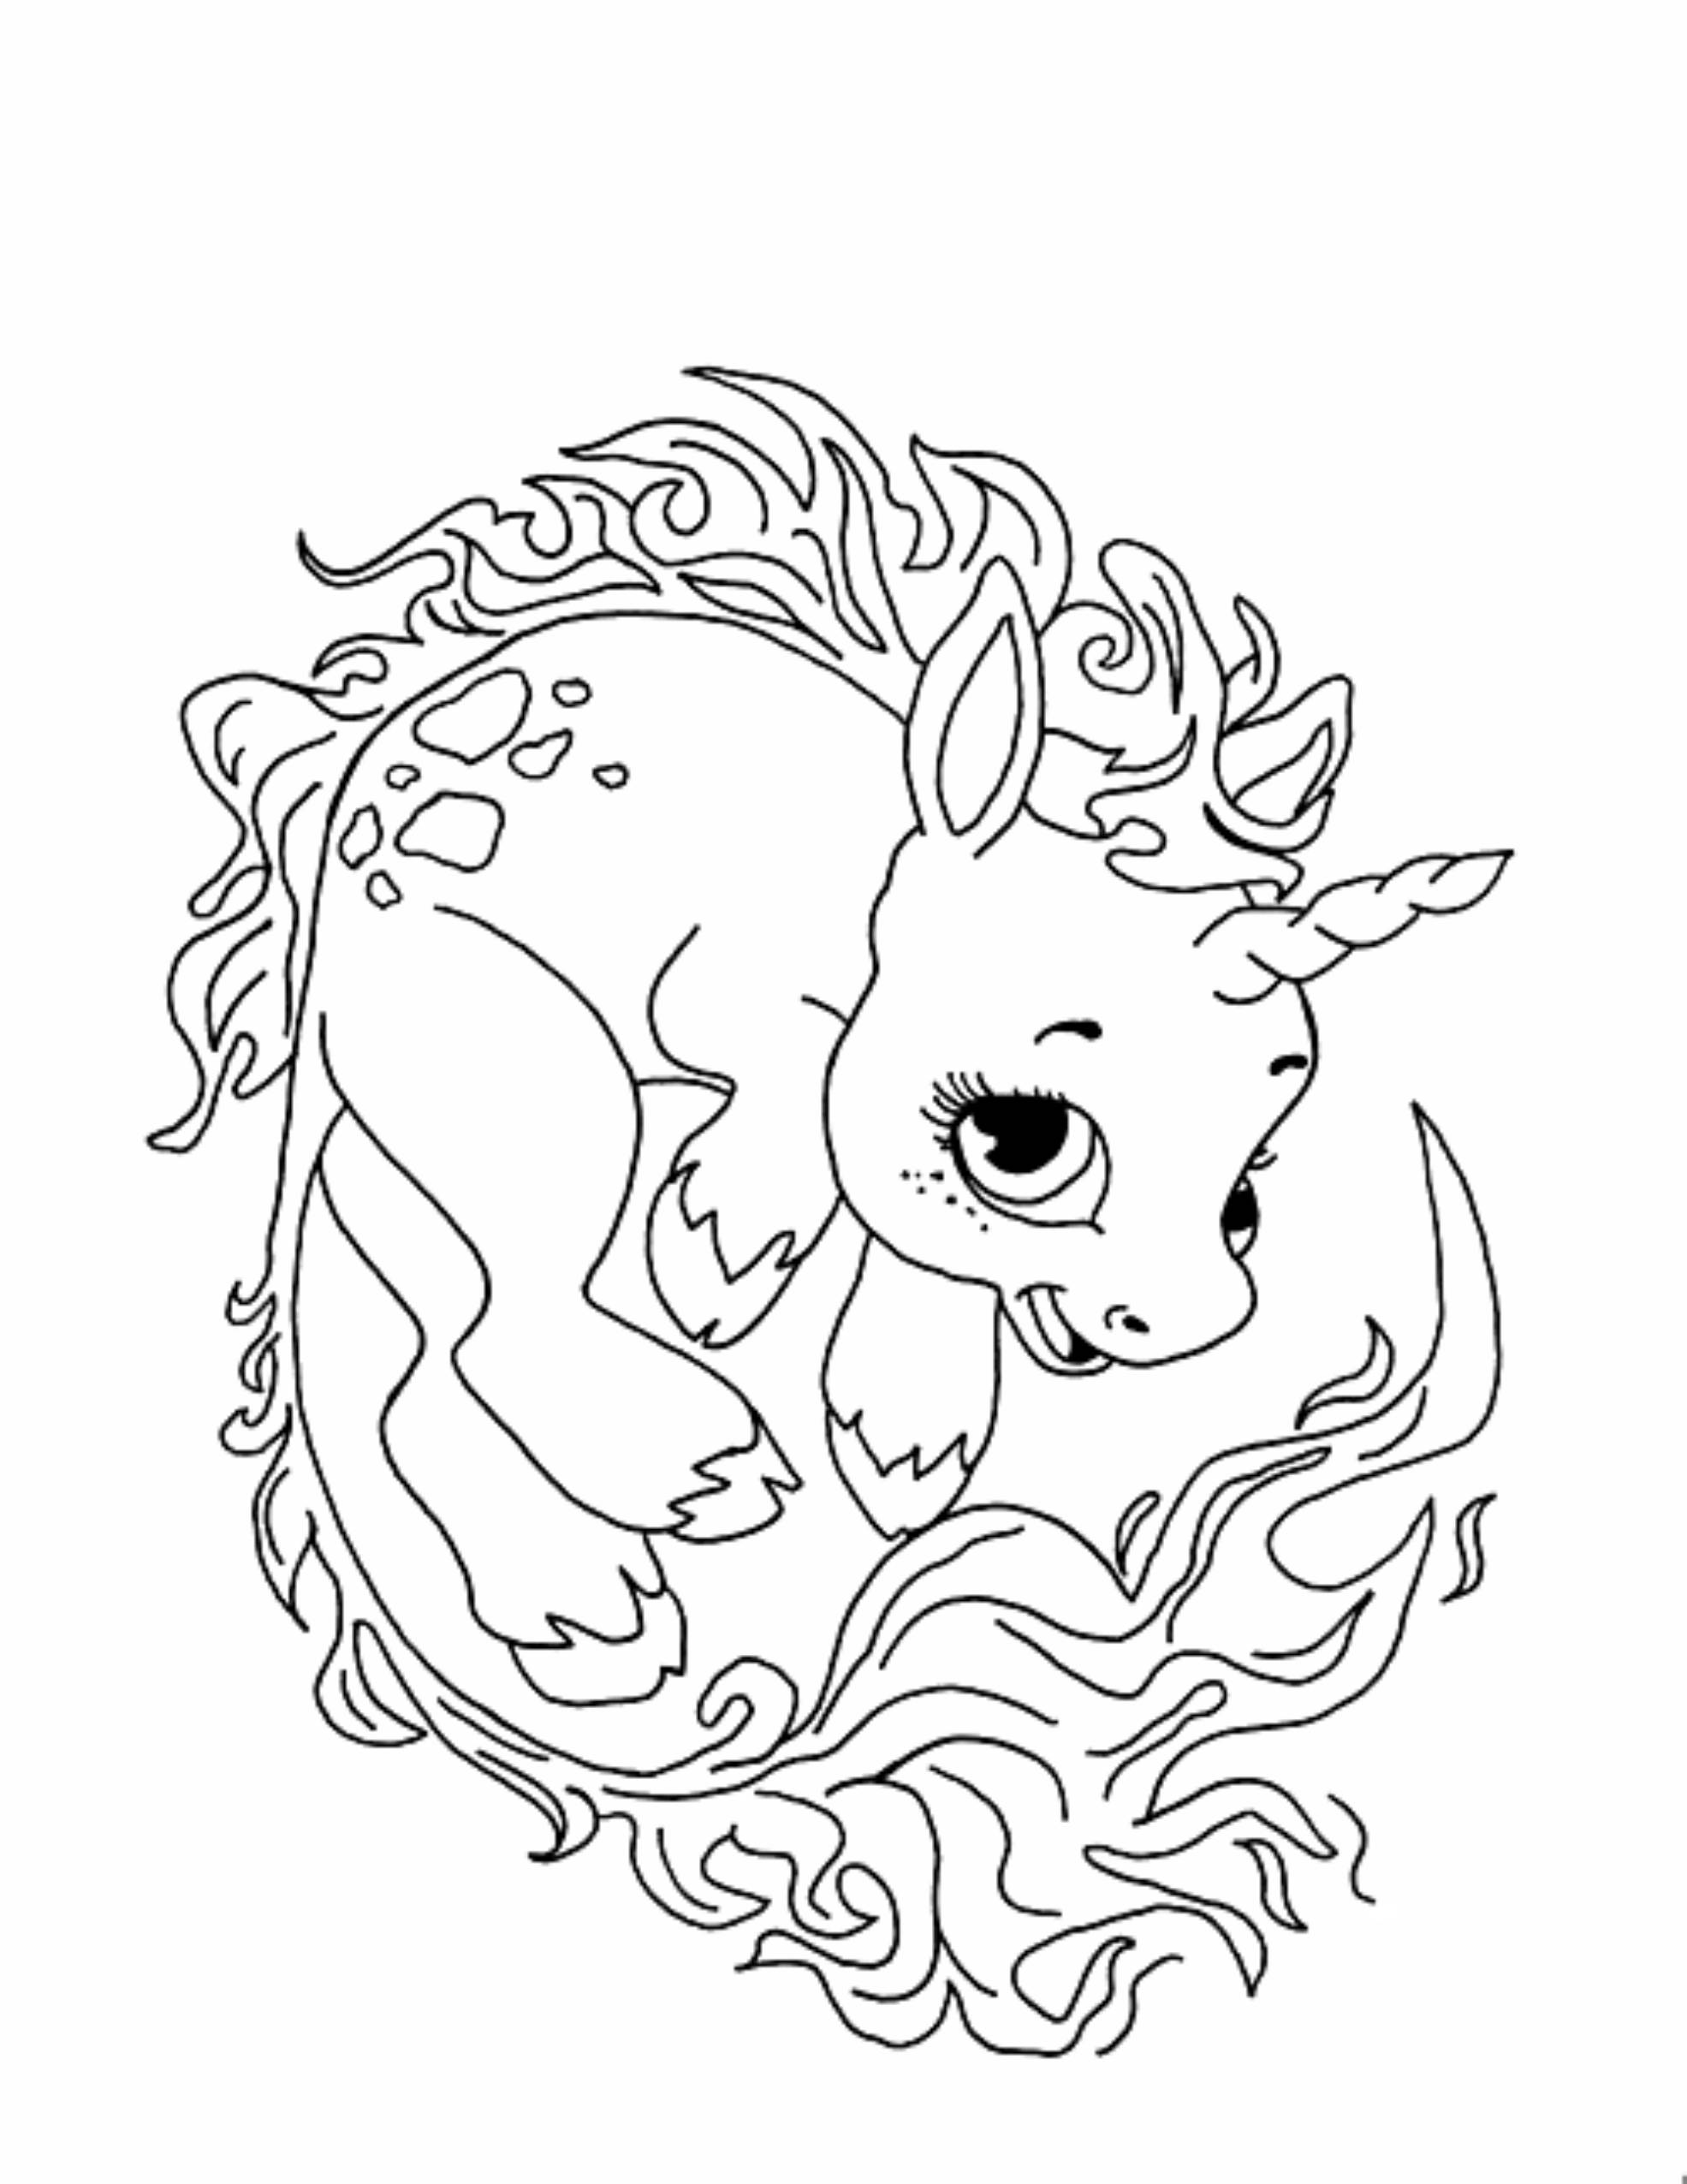 6 Pics of Cute Unicorn Coloring Pages - Cute Baby Unicorn Coloring ...